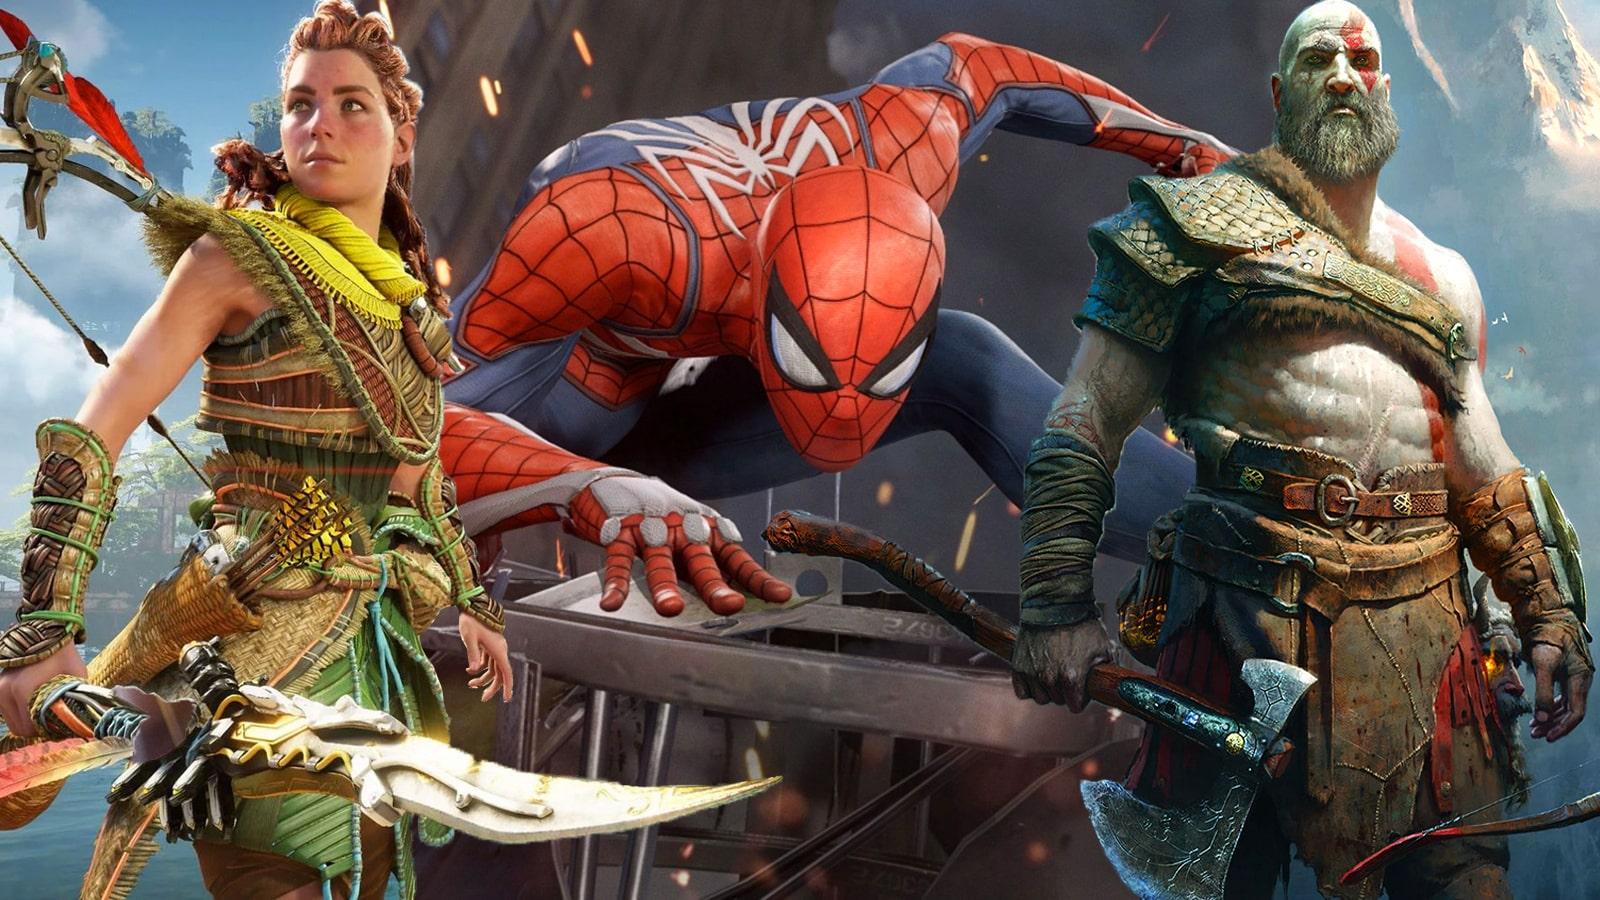 Image showing Spider-Man, Aloy and Kratos